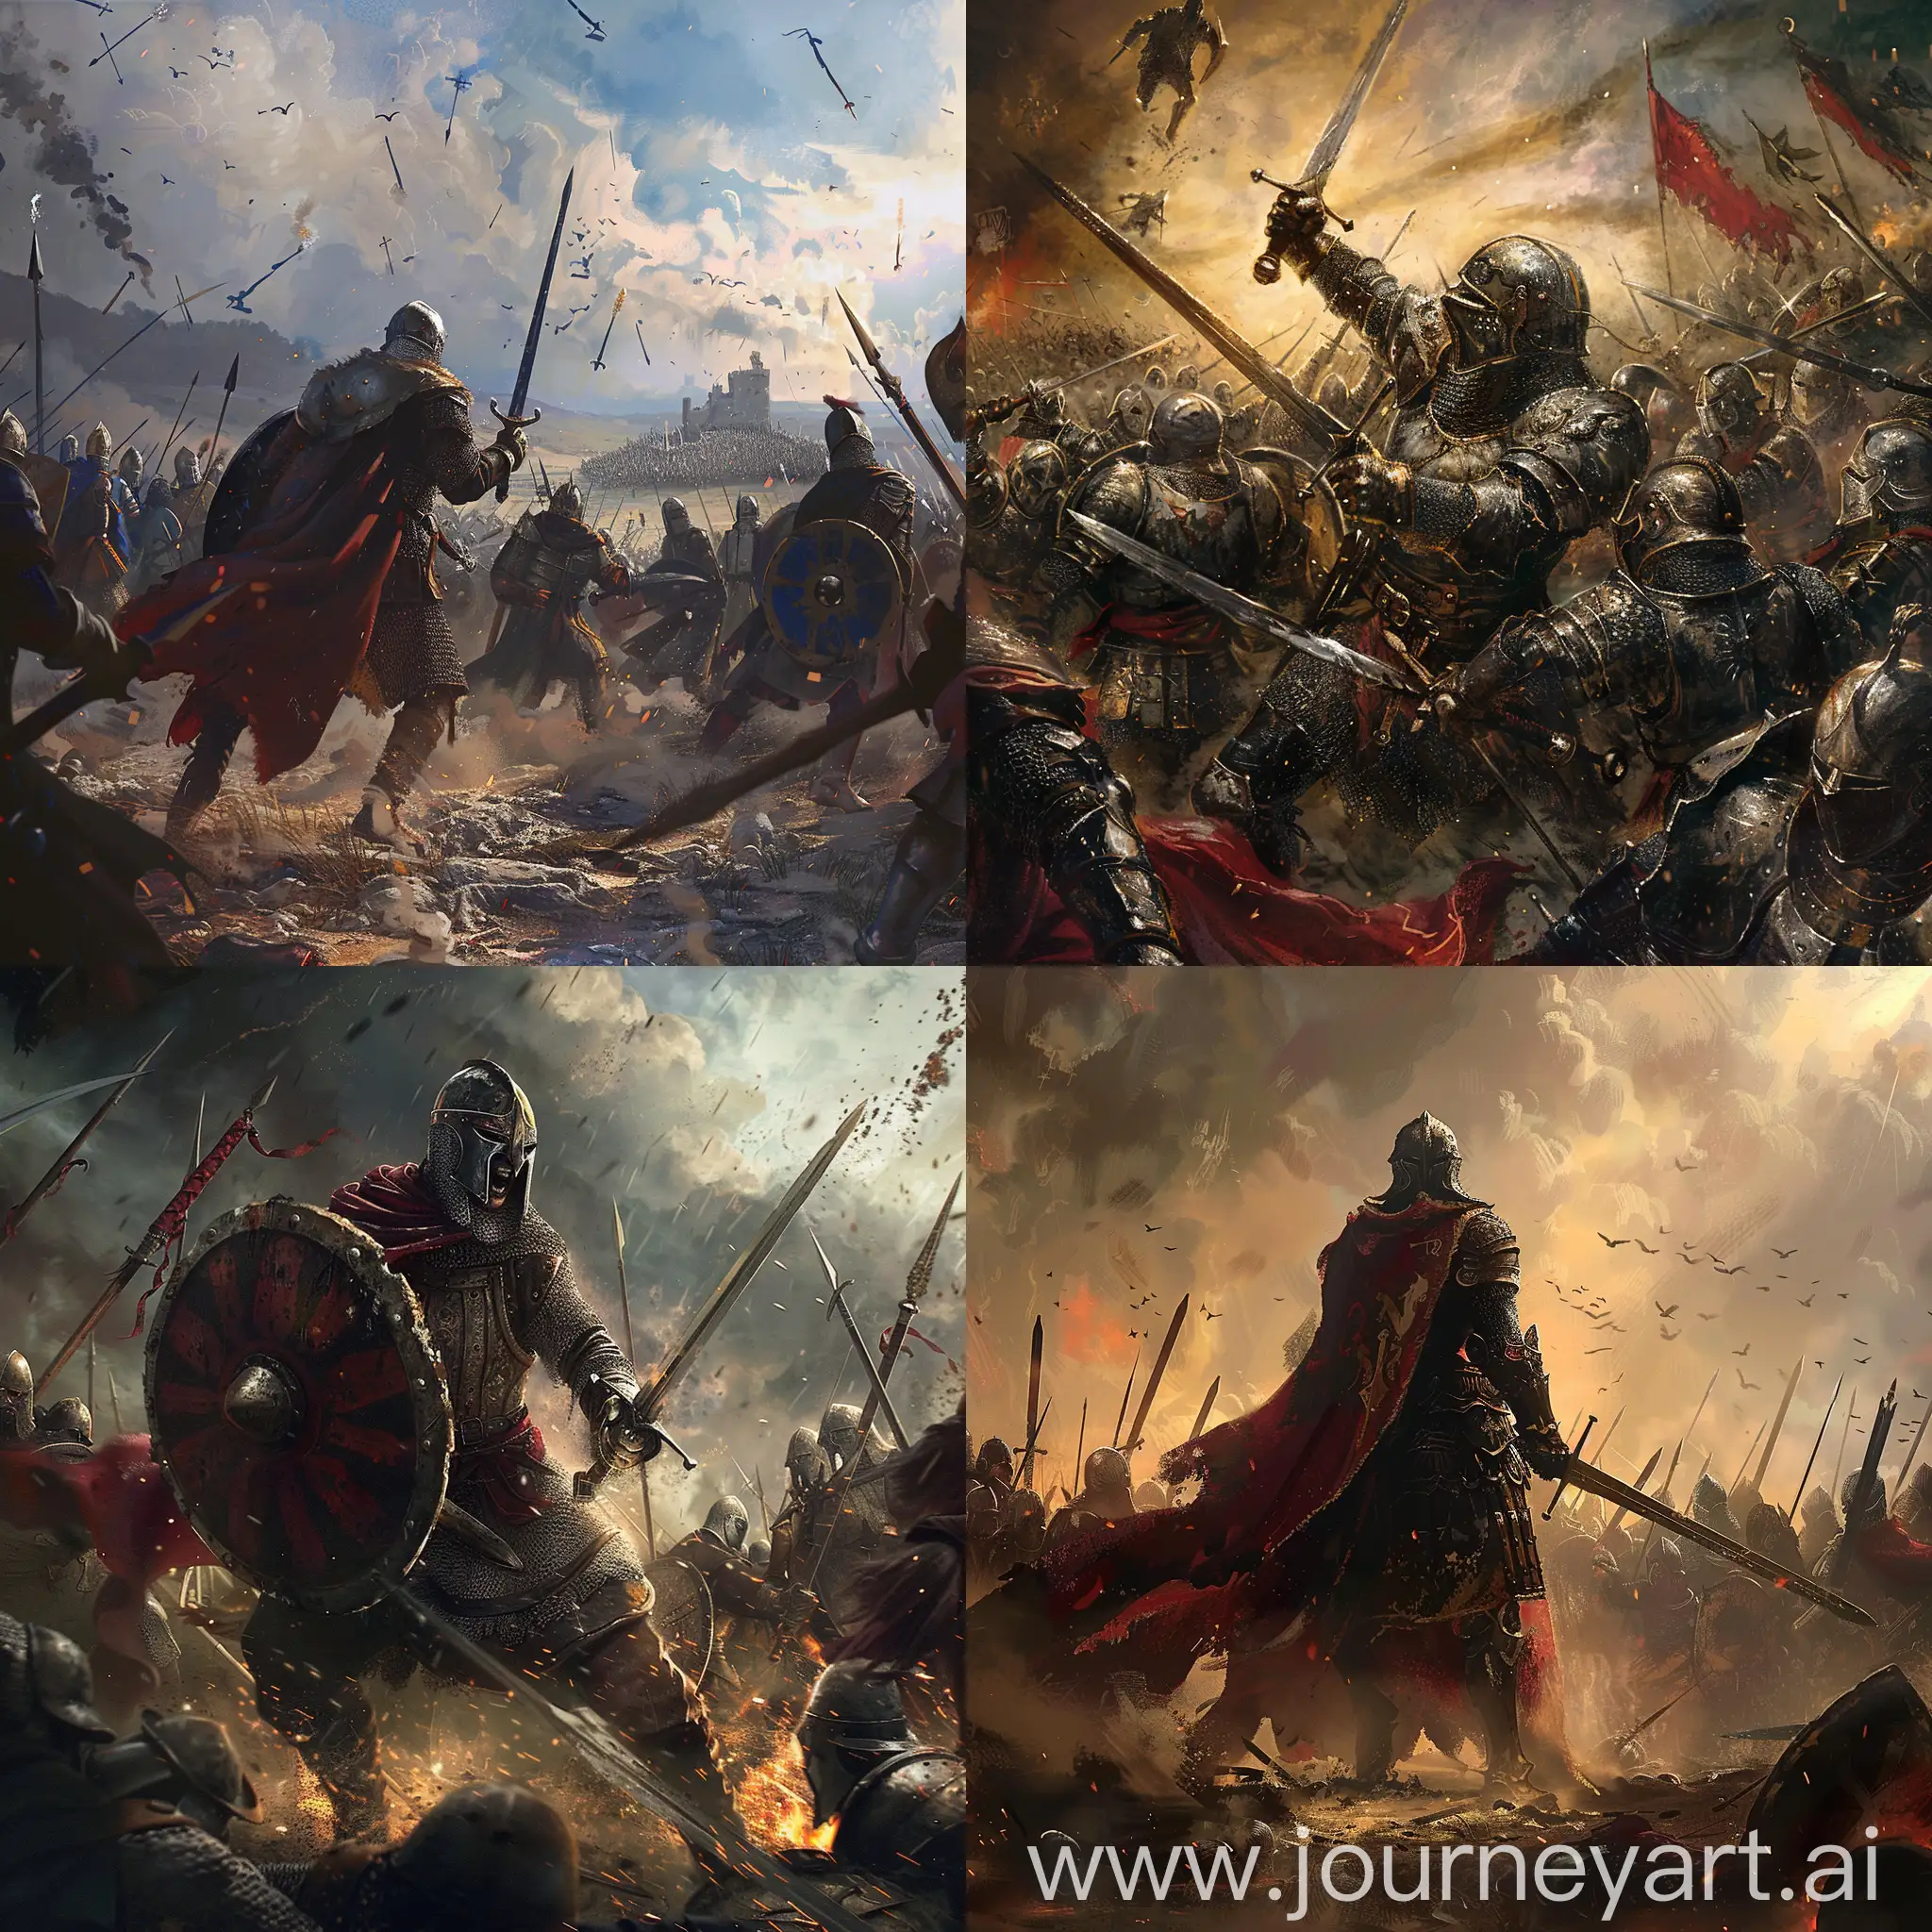 Courageous-Warrior-Surrounded-by-Knights-in-Battle